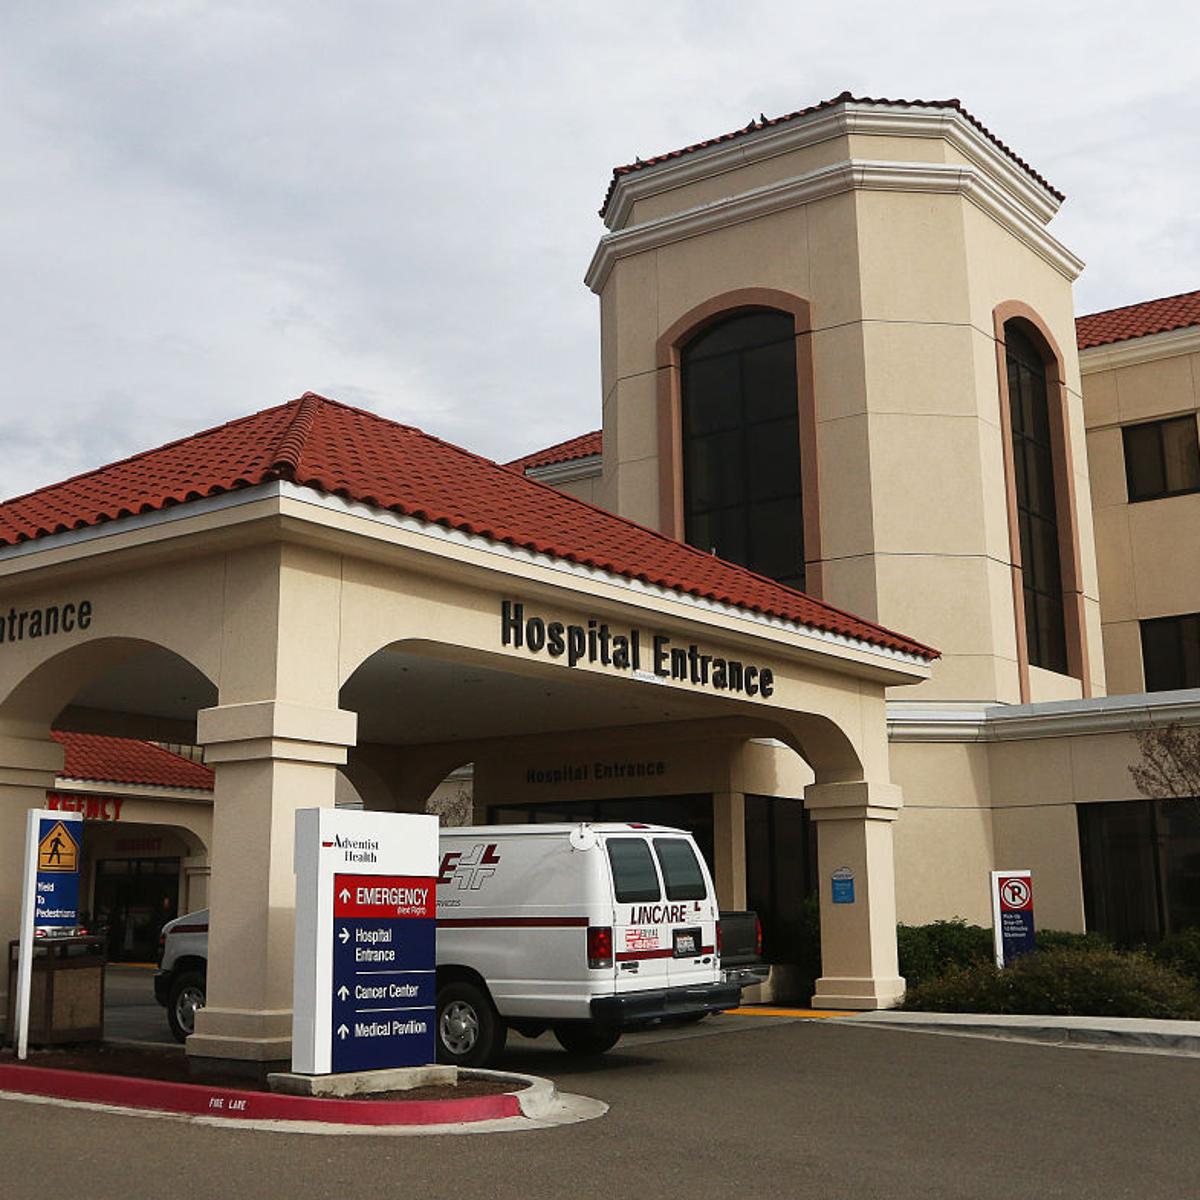 Adventist health in hanford medical records 24 hour fitness discount kaiser permanente